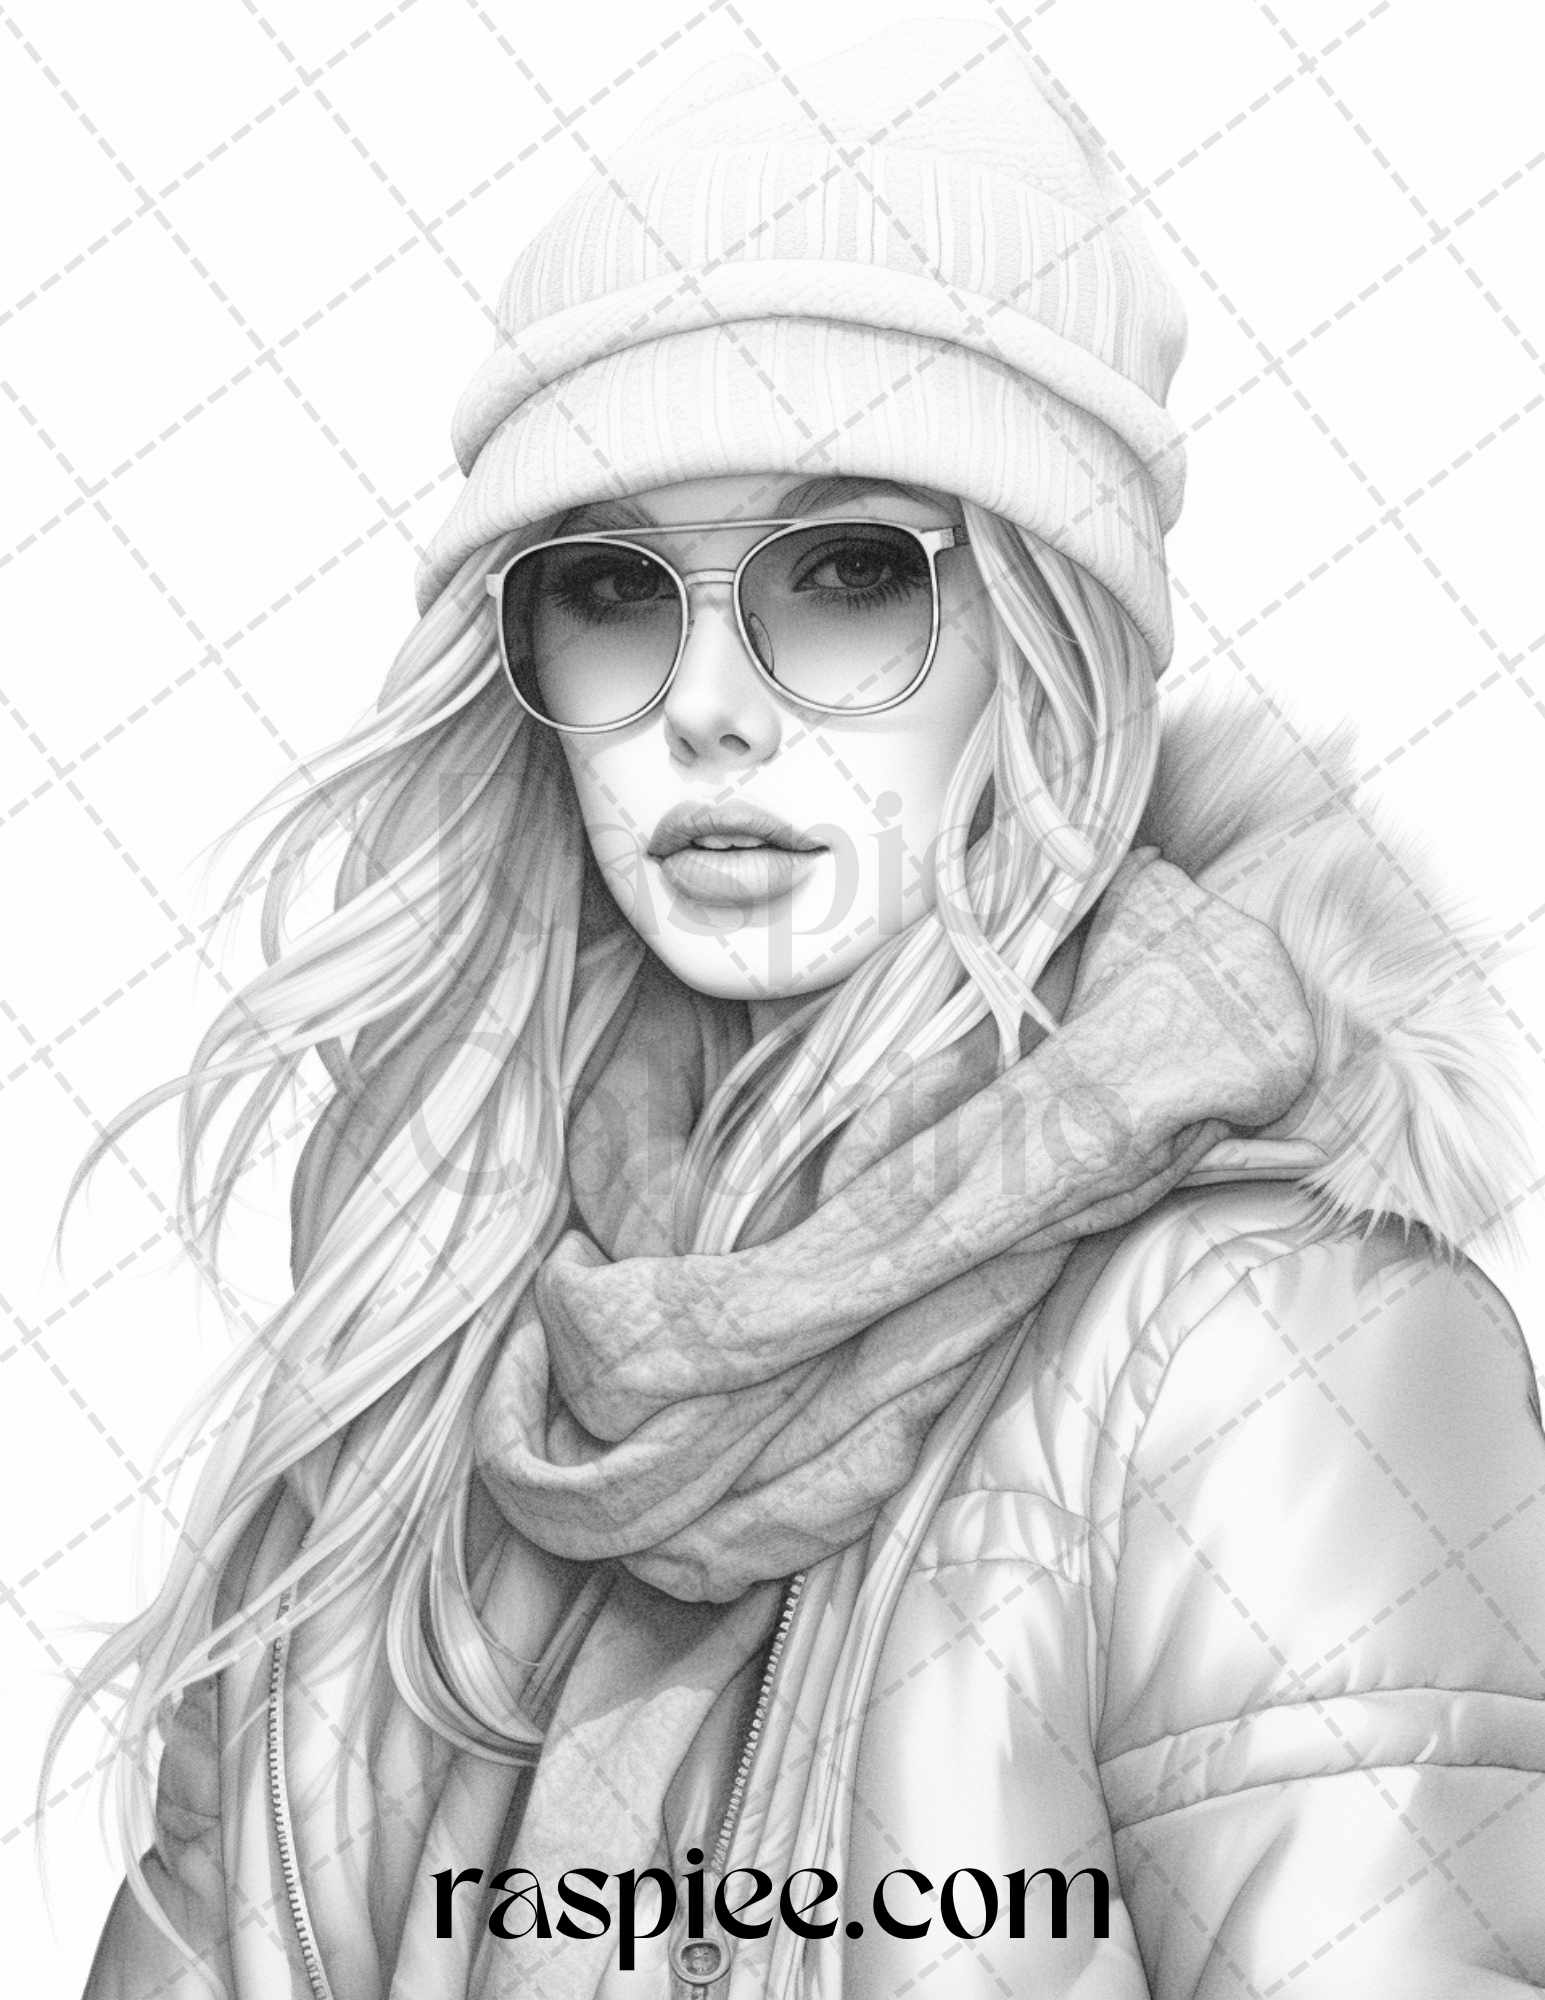 Winter Fashion Coloring Page, Adult Coloring Book Illustration, Holiday Stress Relief Coloring, DIY Coloring Activity, Creative Coloring Page, High-Quality Coloring Printable, Fashionable Coloring Sheet